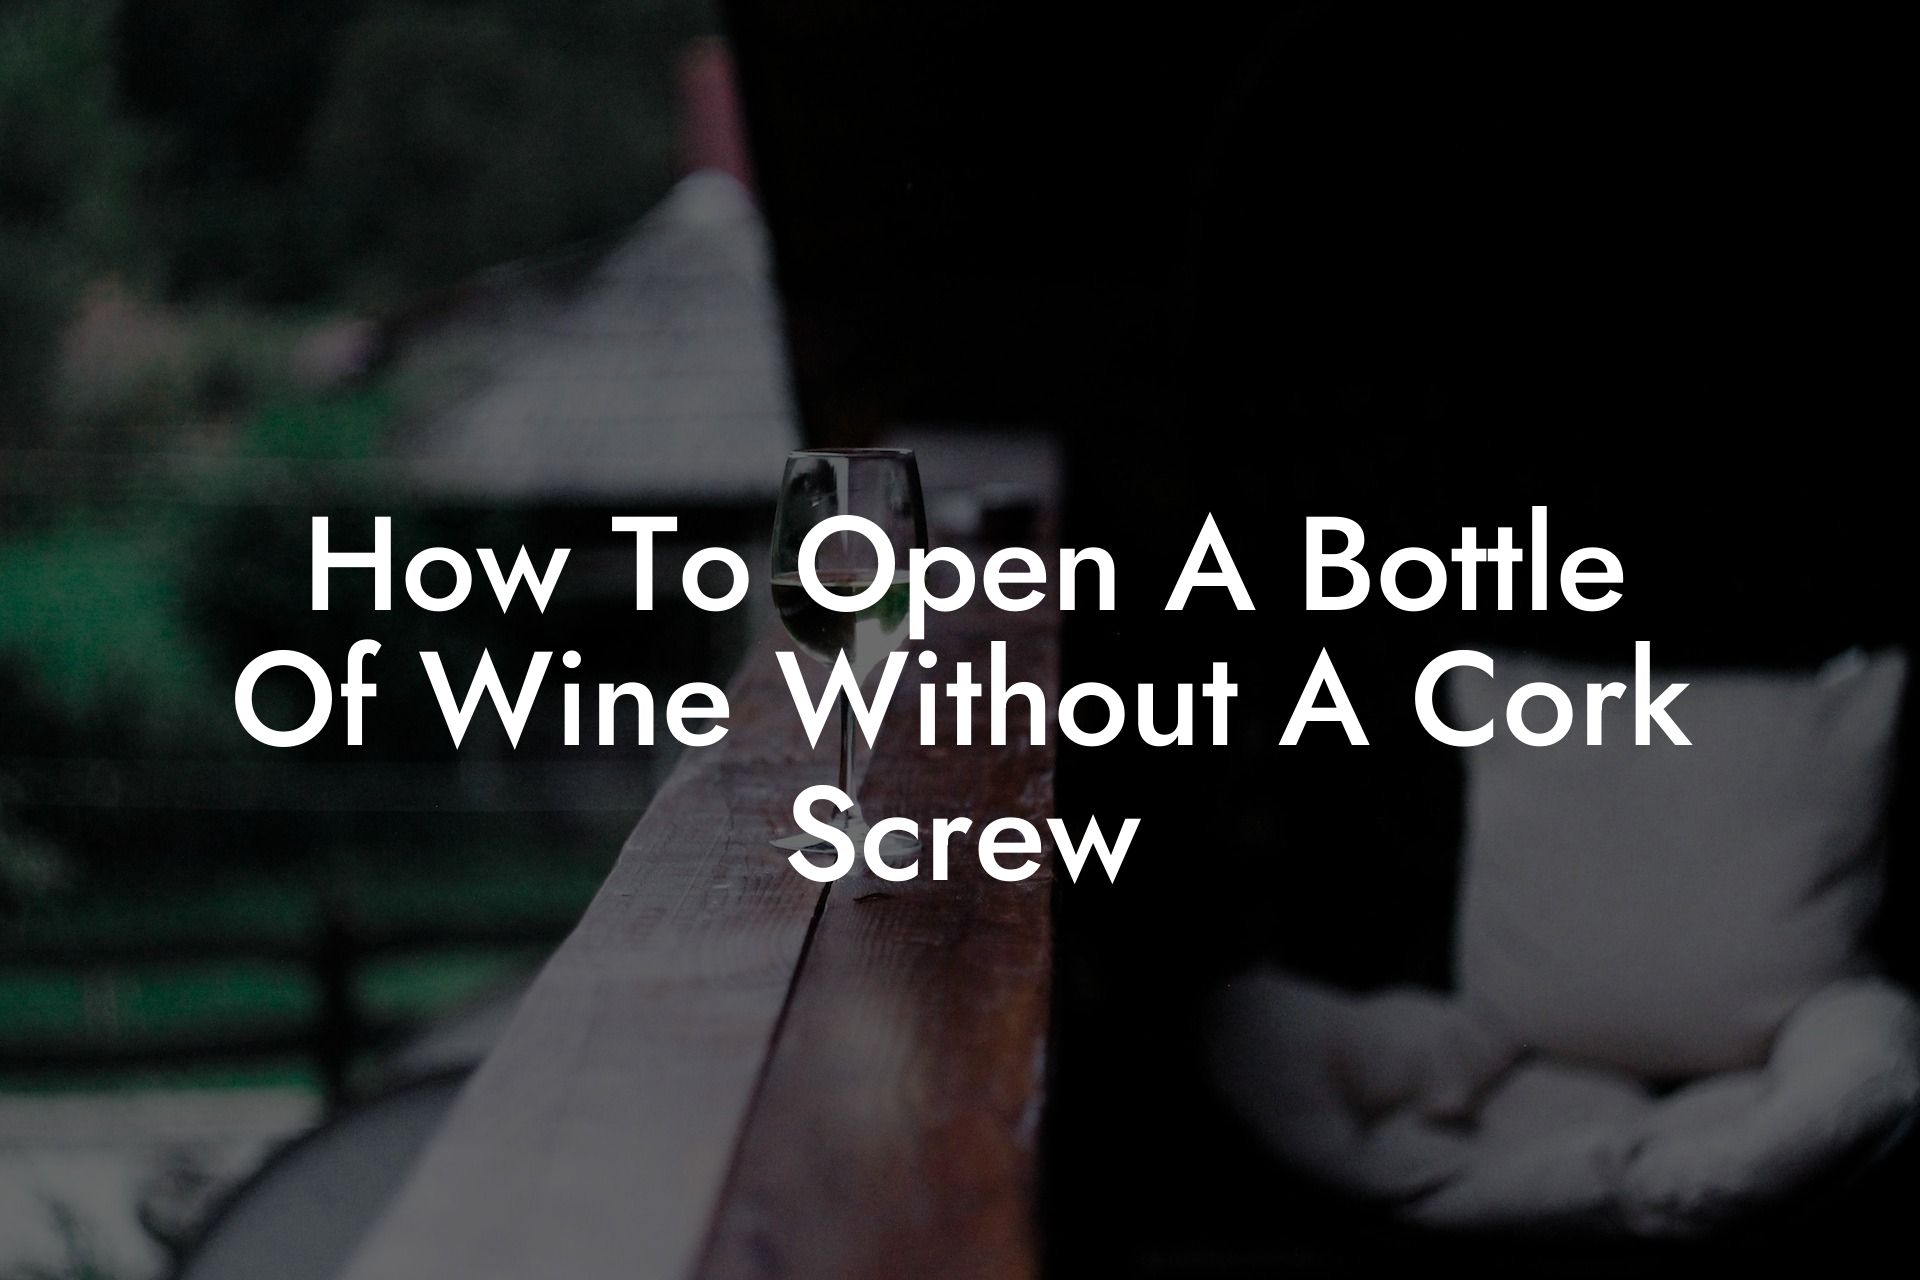 How To Open A Bottle Of Wine Without A Cork Screw